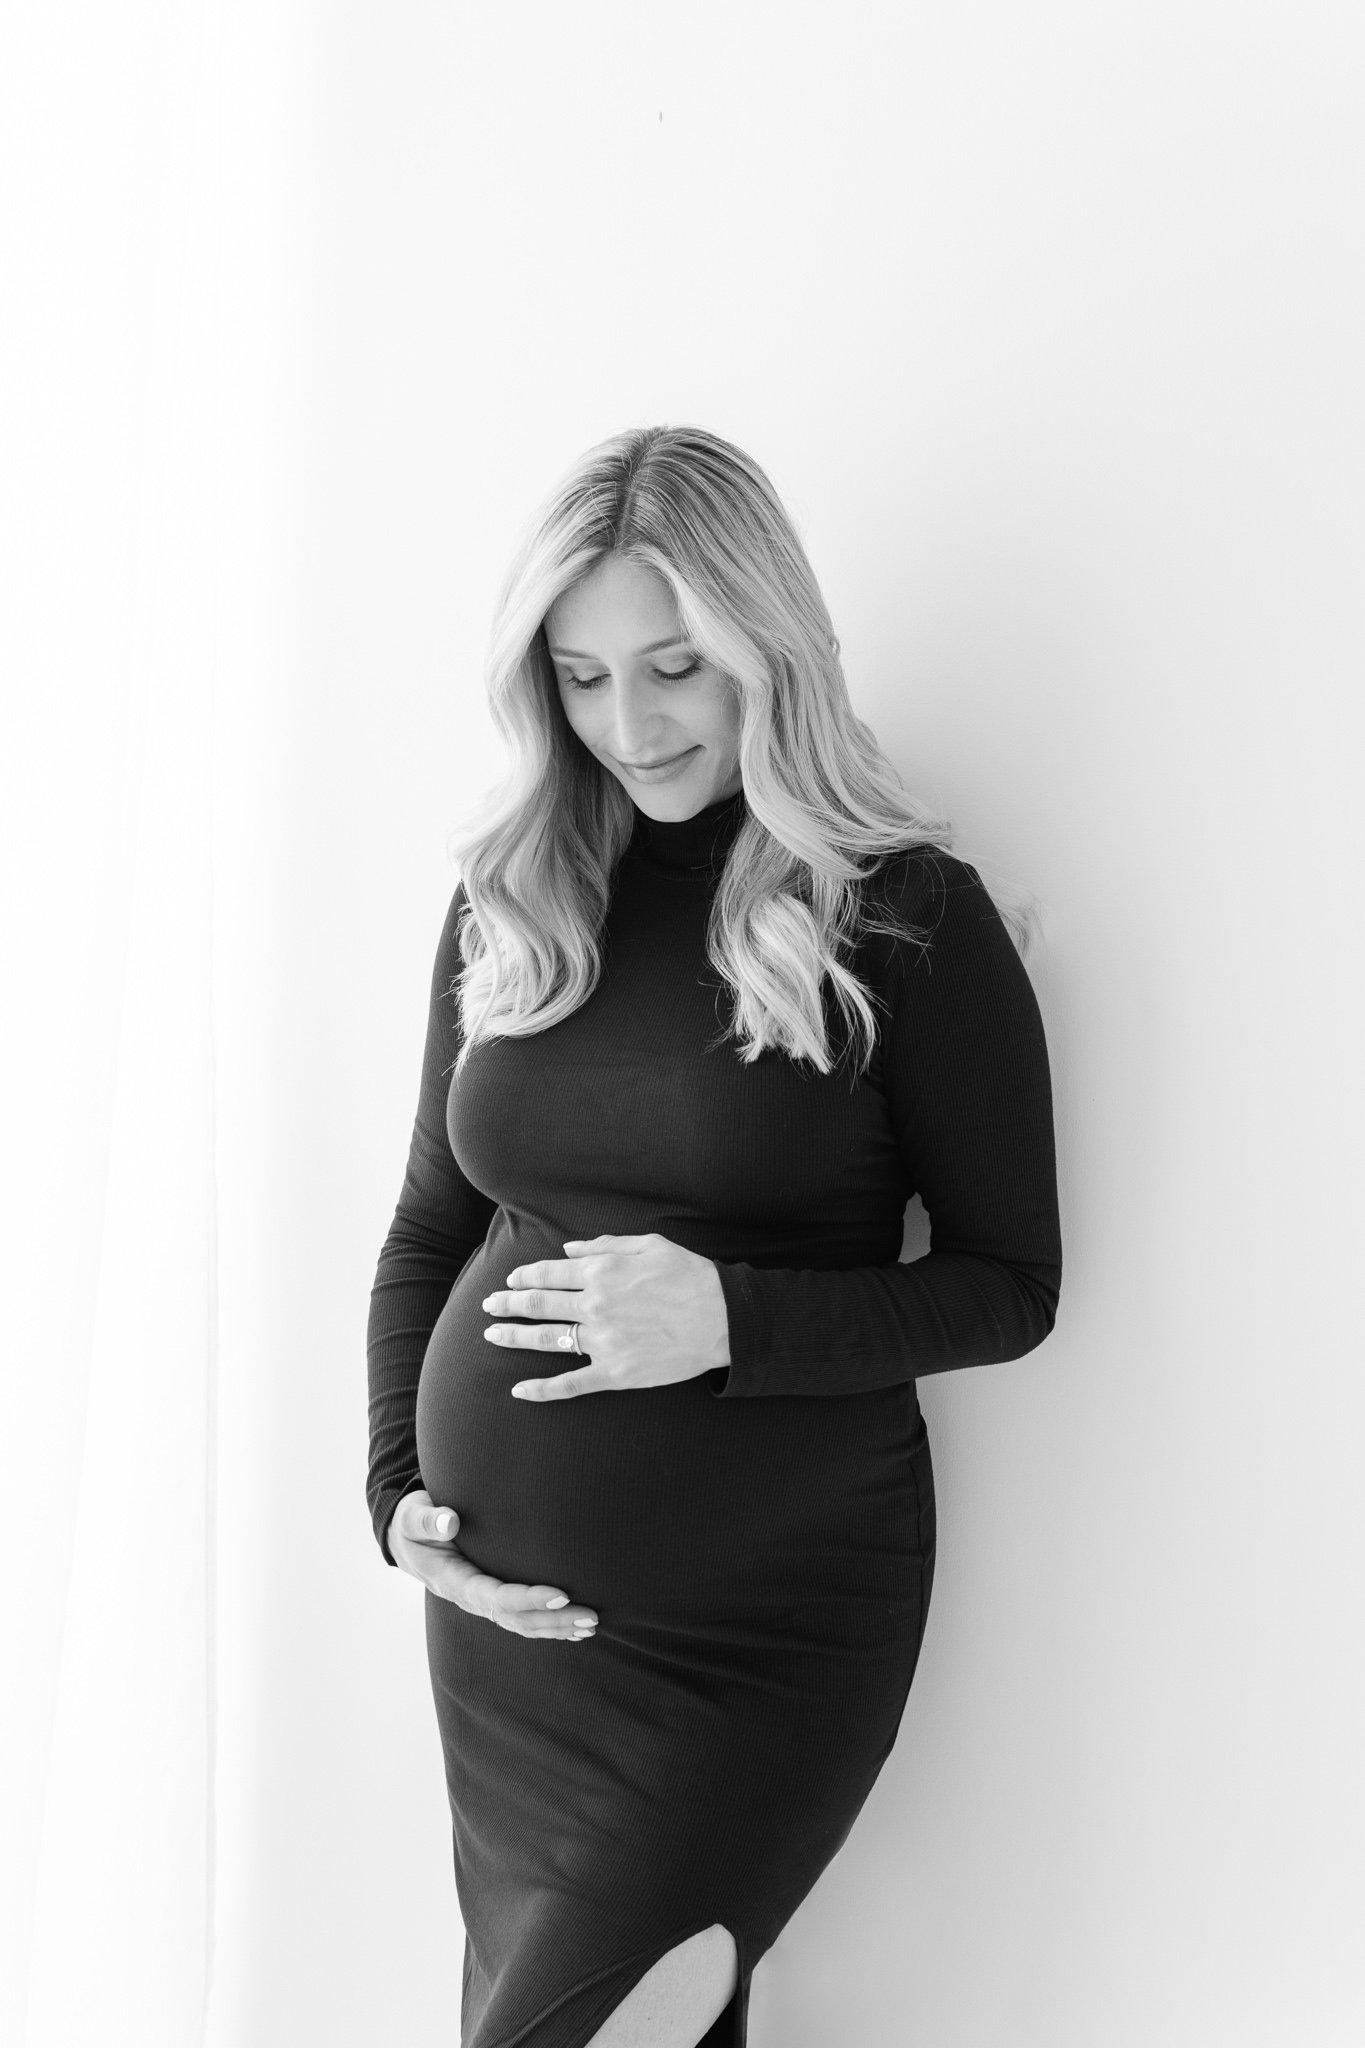  Elegant simple maternity gown for a pregnancy portrait by Nicole Hawkins Photography. long sleeve maternity gown #NicoleHawkinsPhotography #NicoleHawkinsMaternity #Studiomaternityportraits #NewJerseymaternity #NewYorkMaternity 